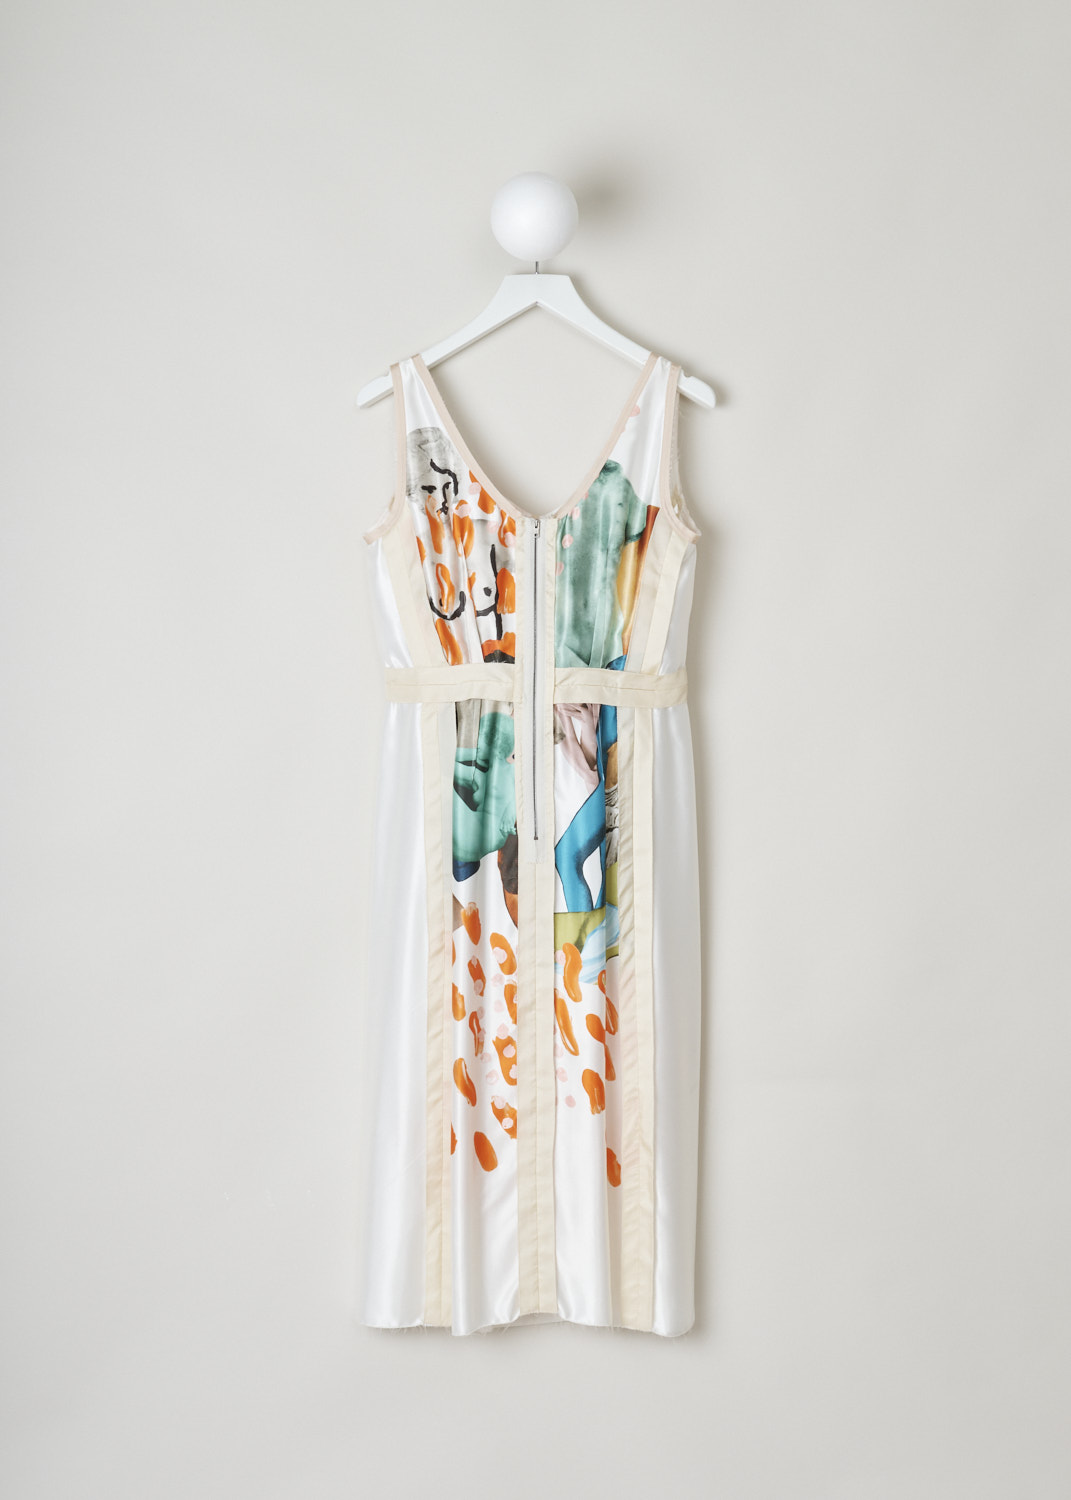 Marni, ABMA0246Q4_TV704_Y5591, White dress with an abstract print, white, print, back, White dress made in the empire model. Featuring a lovely abstract print in a multi-colour palettes. The length of this model is about knee-high and has a zipper for fastening on the back. 